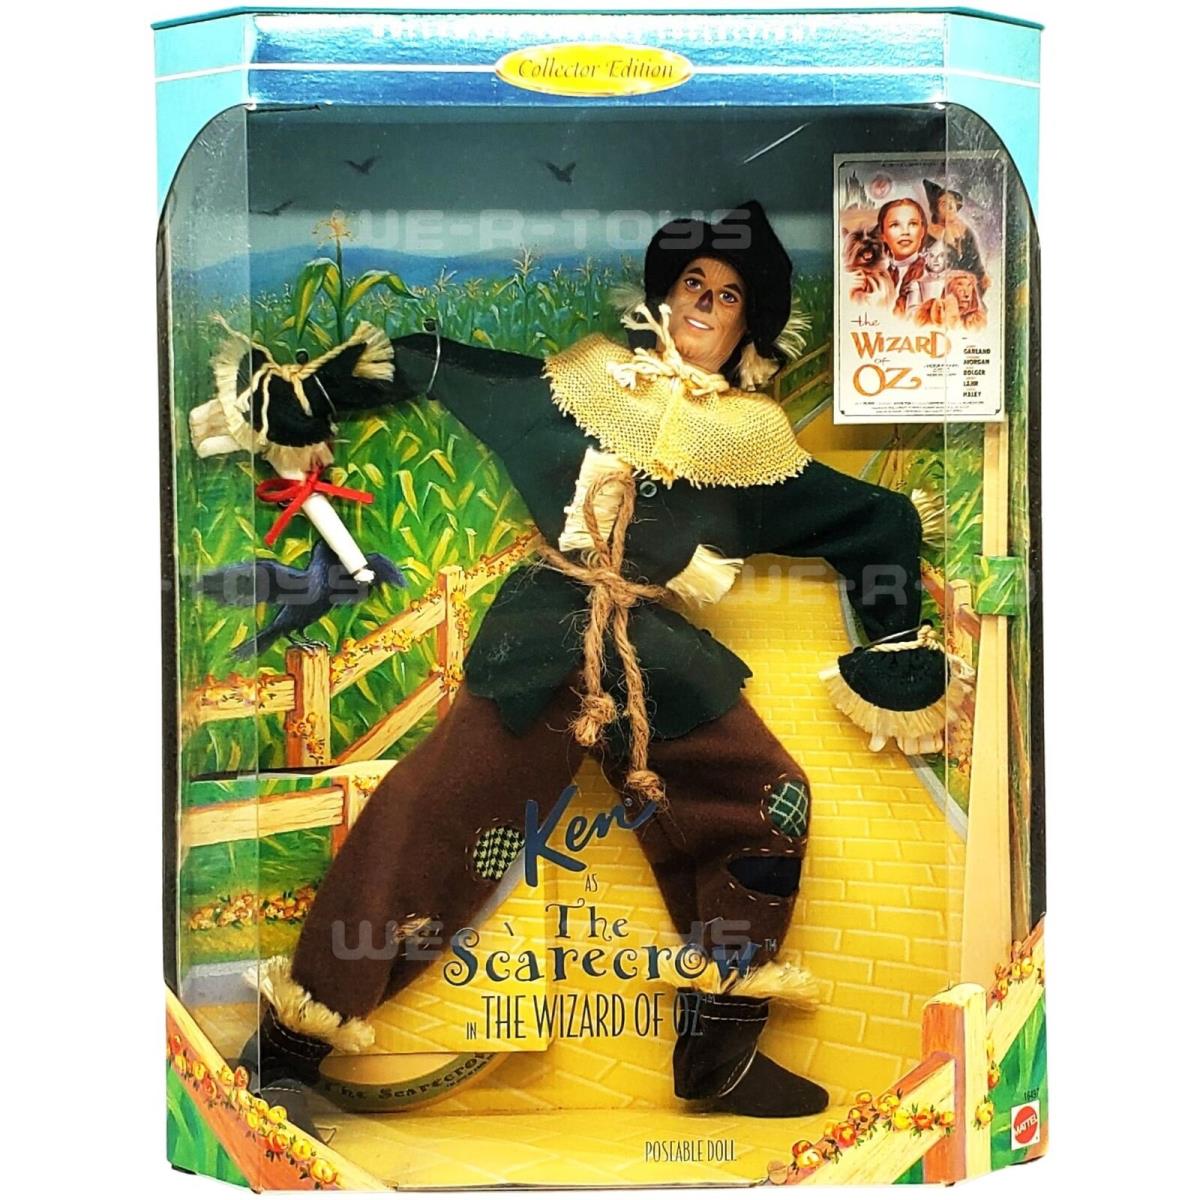 Ken as The Scarecrow Barbie Doll Hollywood Legends The Wizard of Oz 1996 Mattel